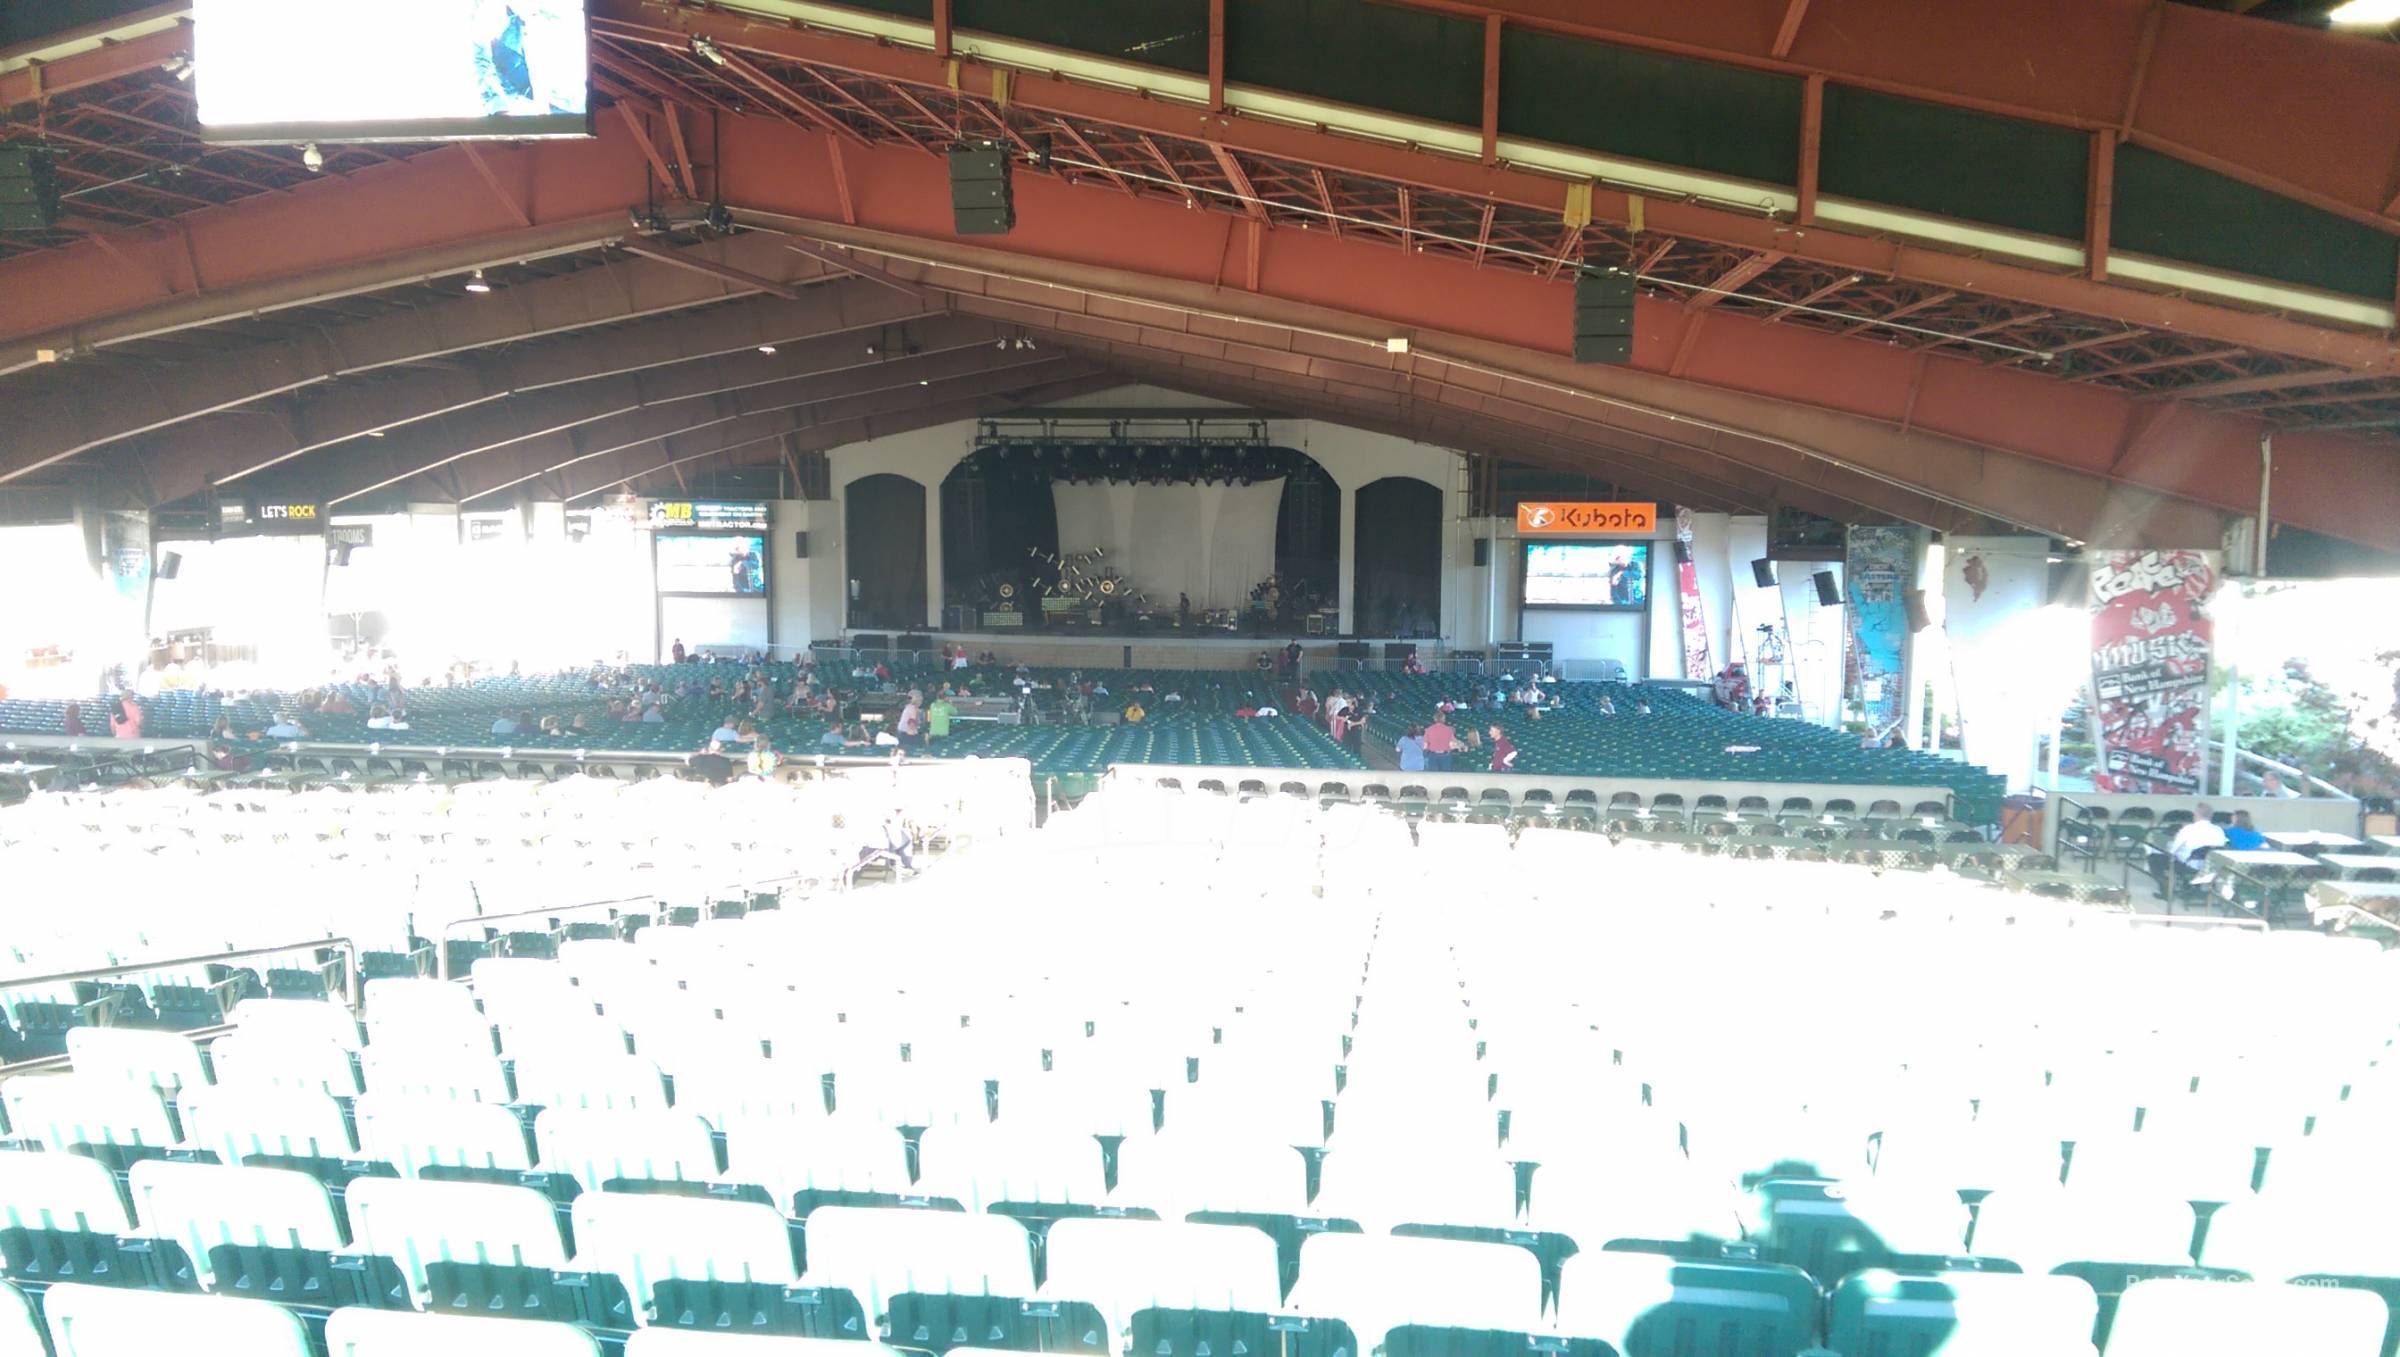 Section 3D at Bank of New Hampshire Pavilion